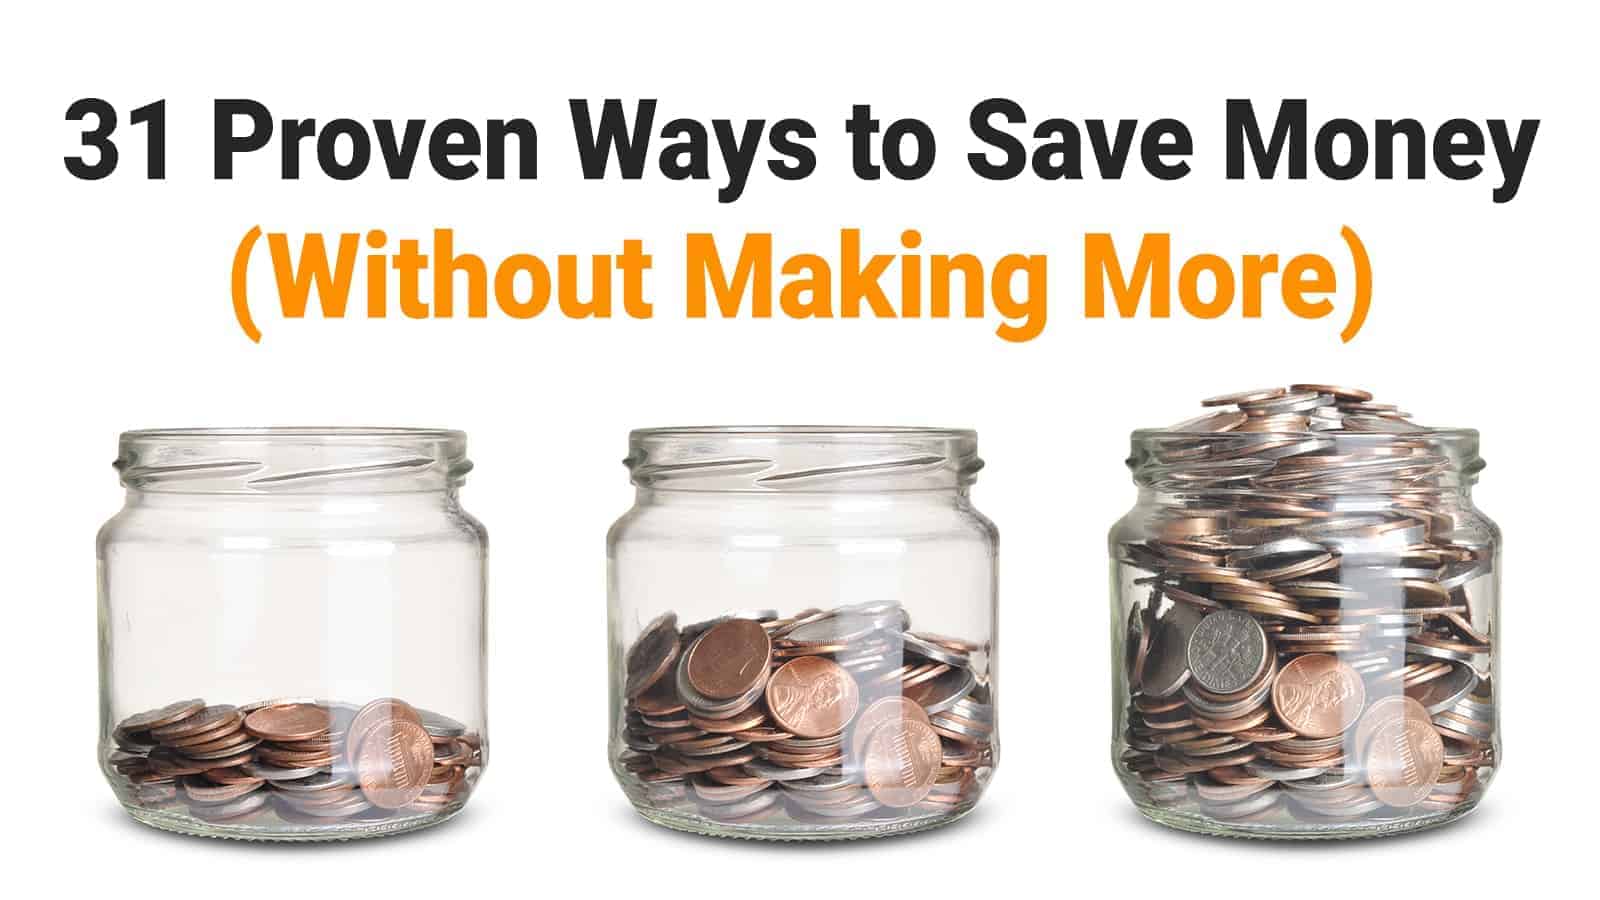 31 Proven Ways to Save Money (Without Making More)